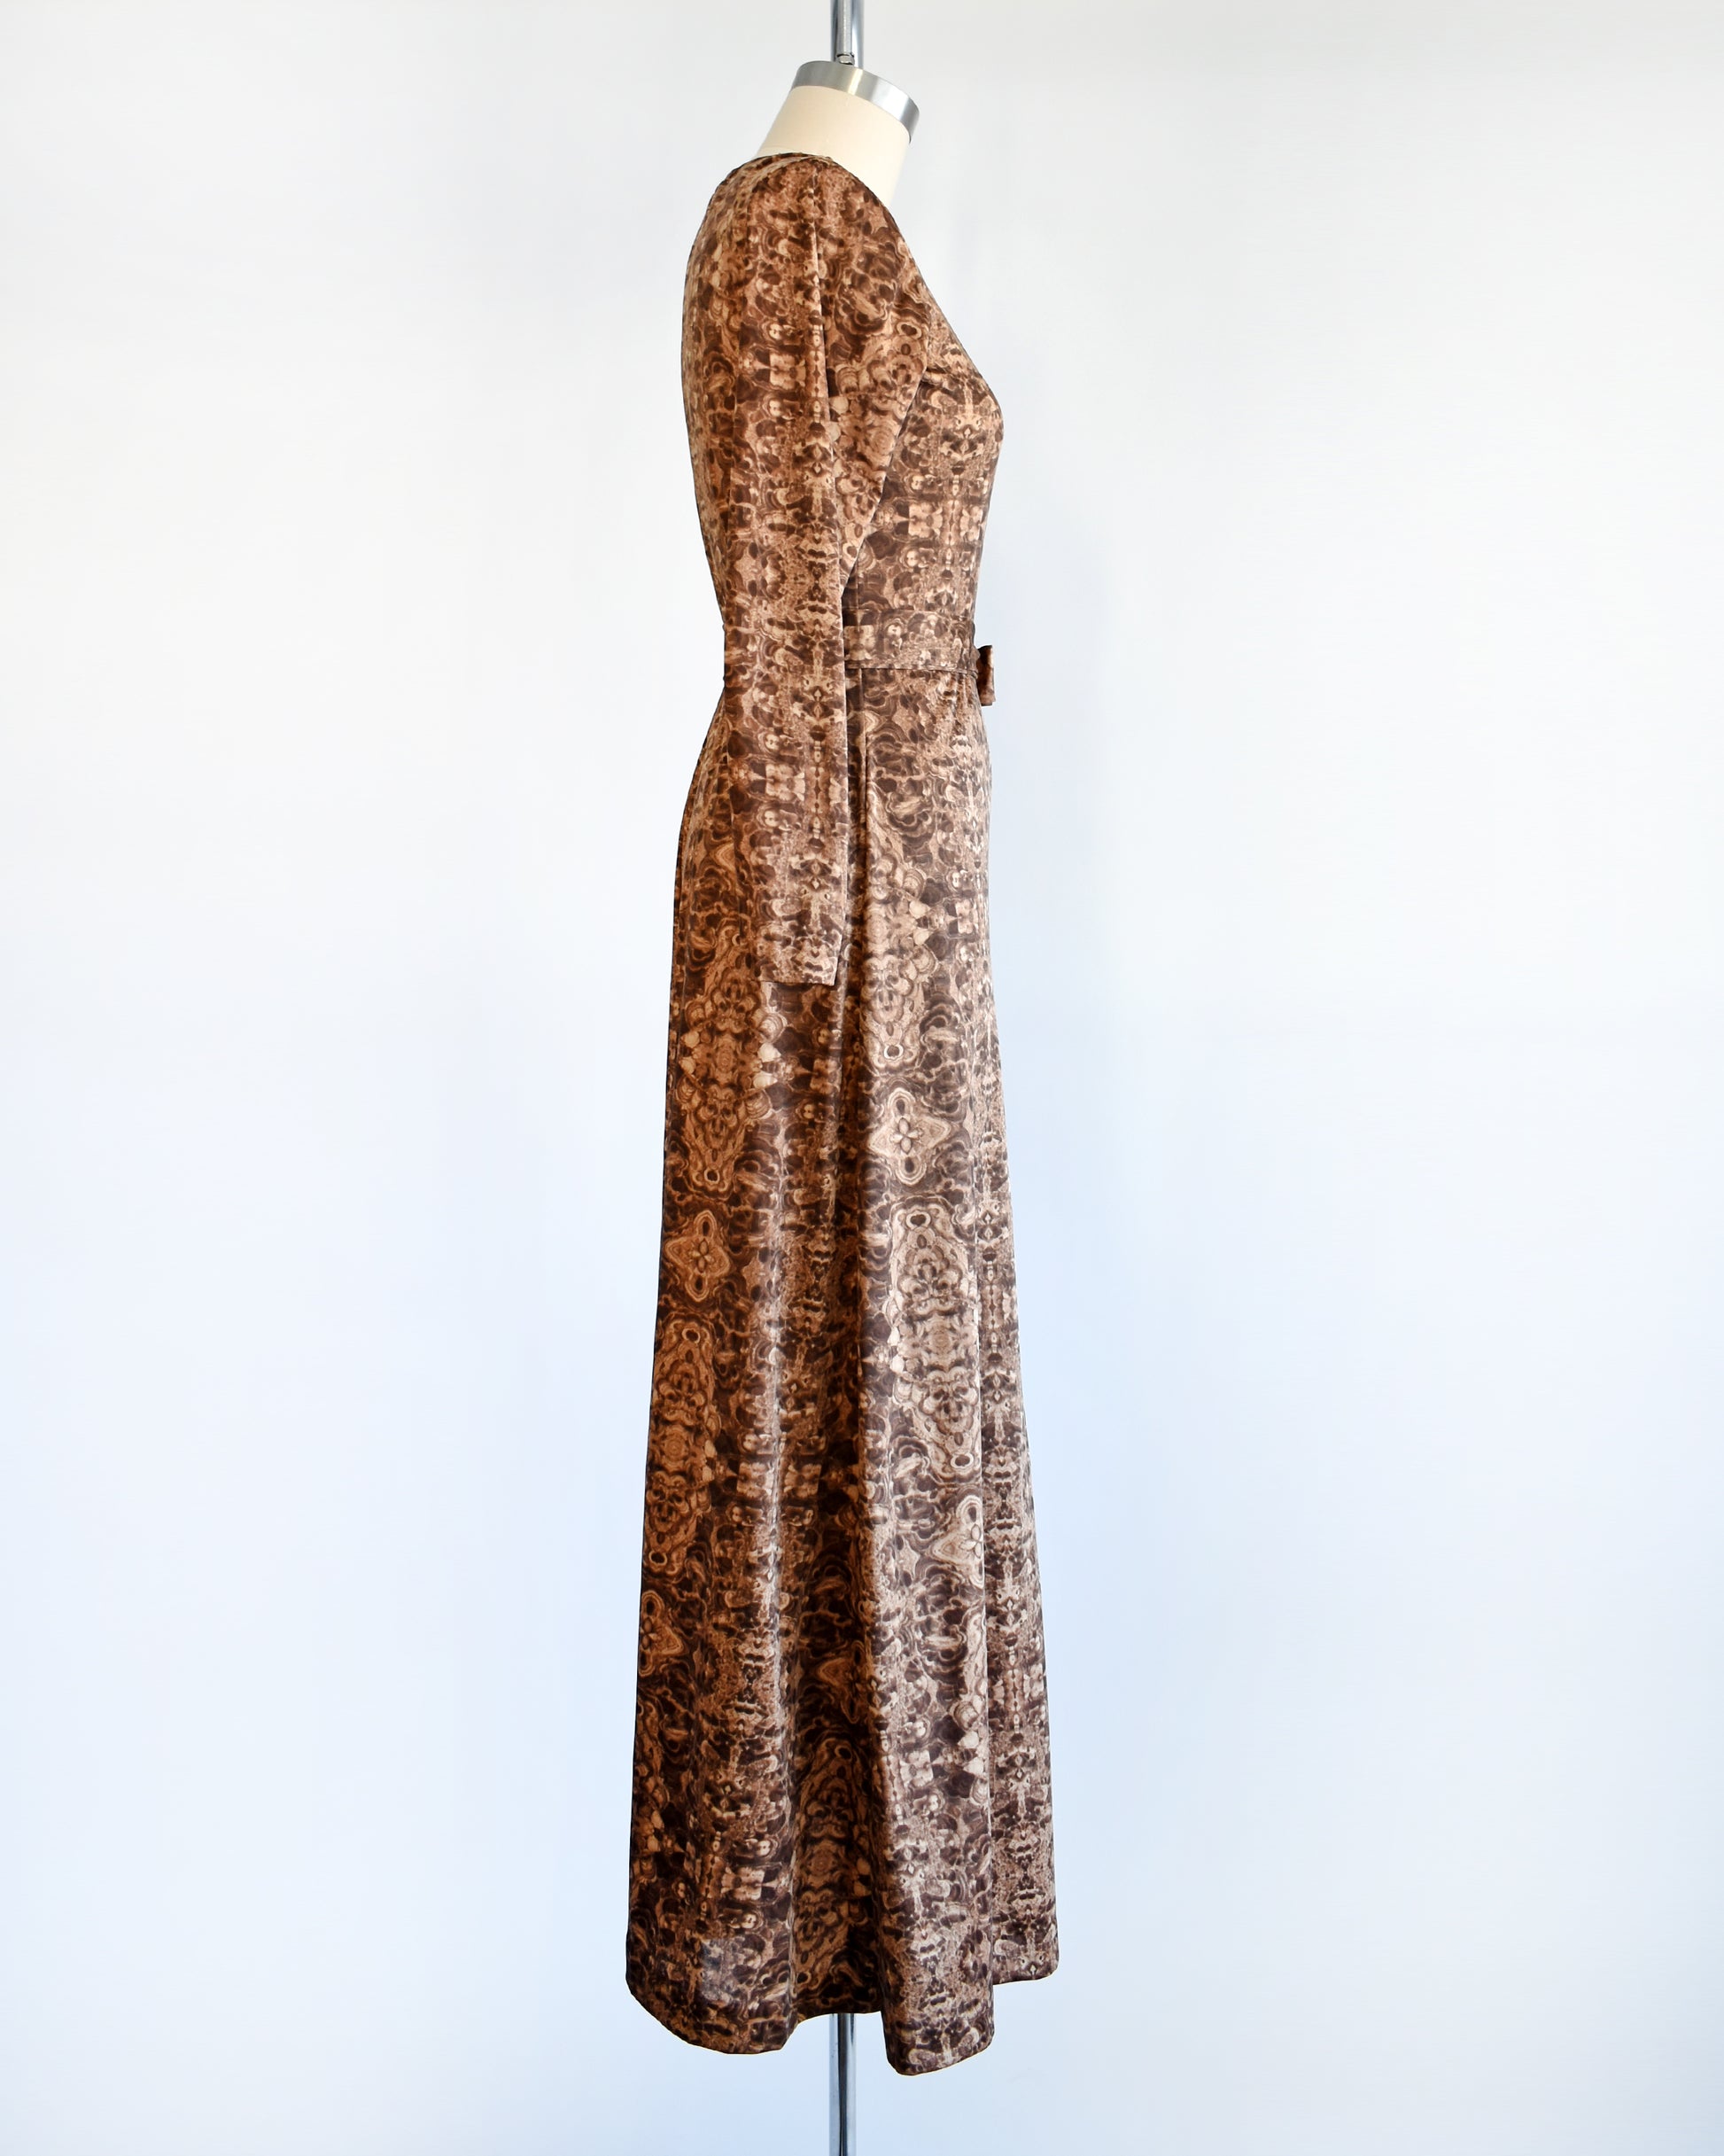 Side view of a vintage 1970s long sleeve maxi dress which features a psychedelic kaleidoscope pattern in light and dark brown.